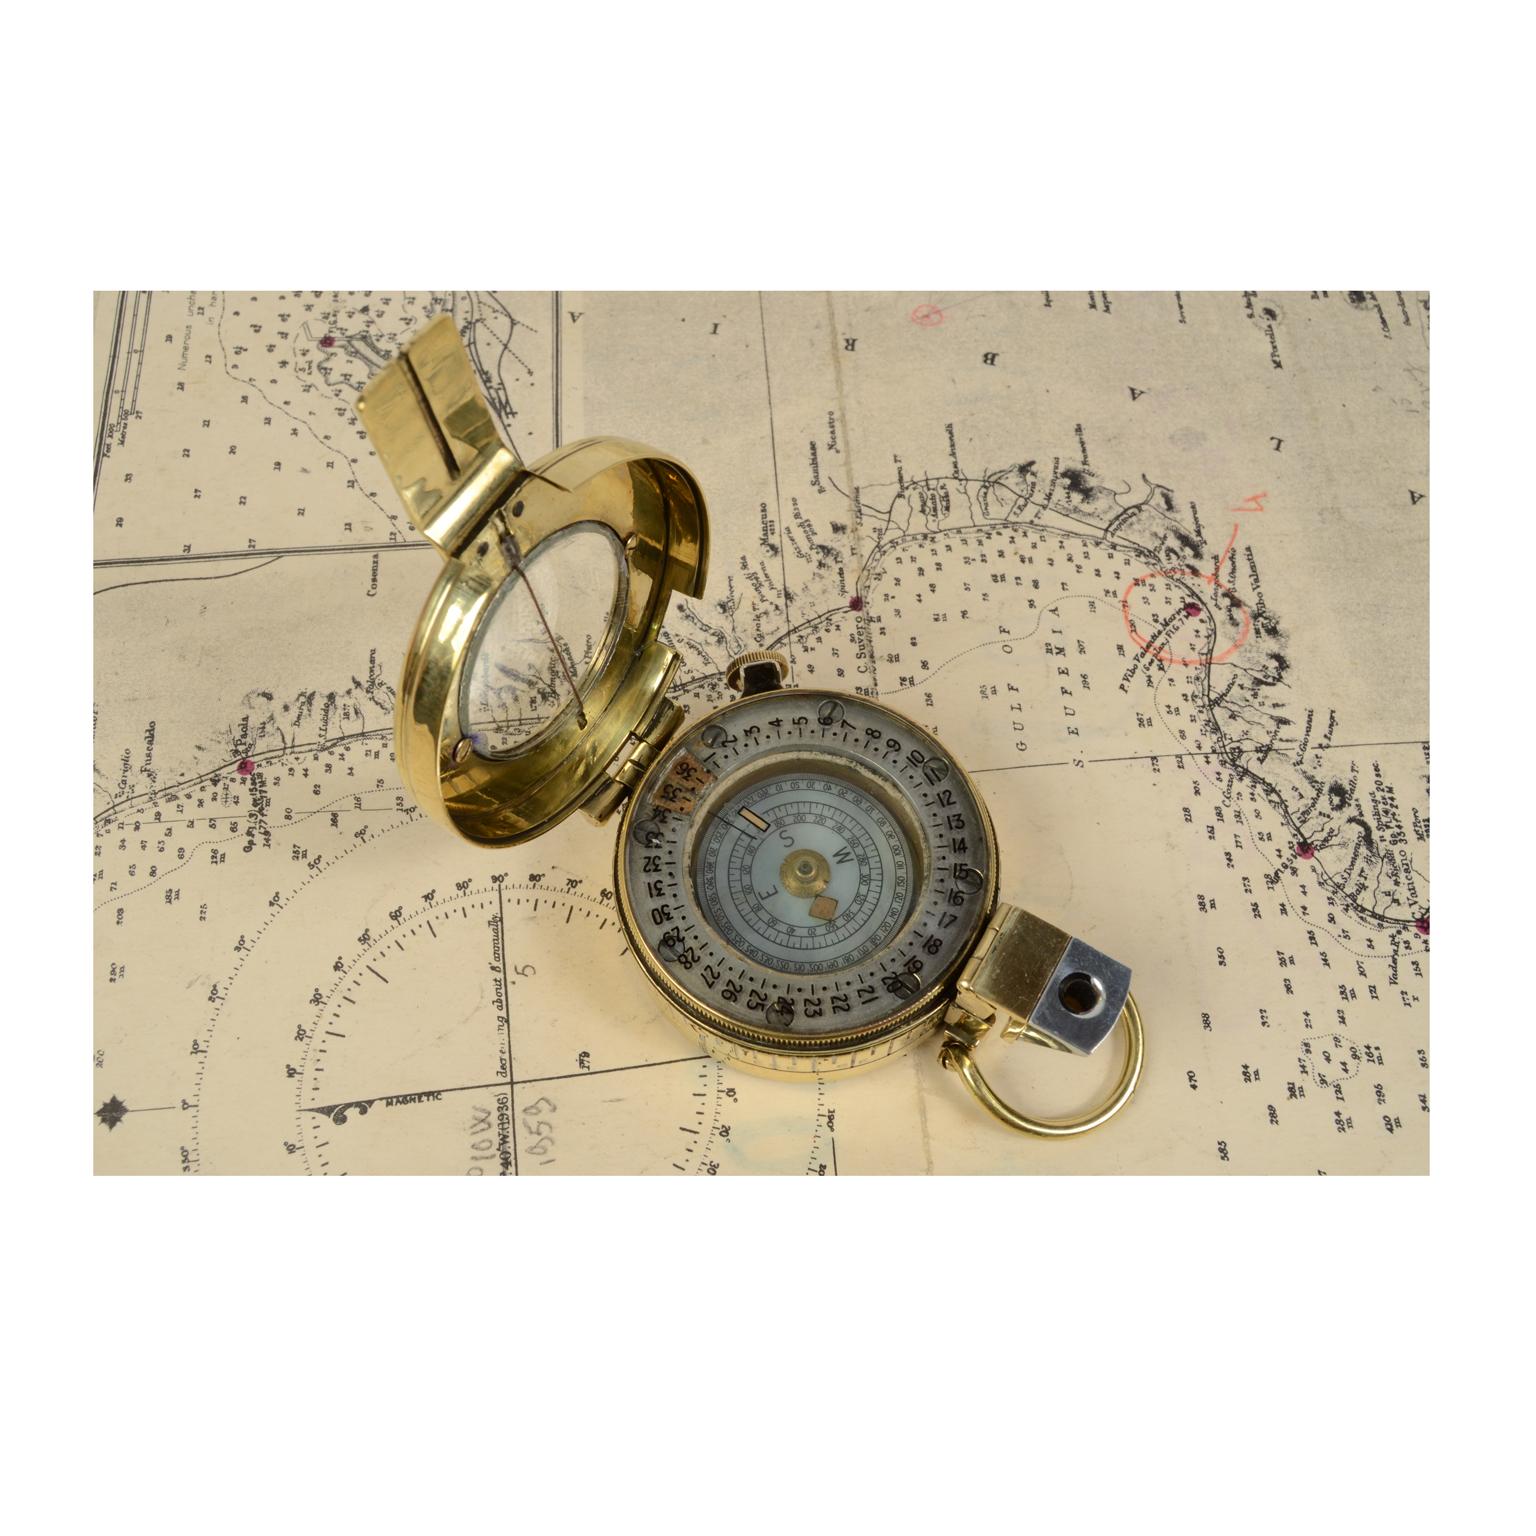 Prismatic liquid bearing compass signed T.G. C. Ltd London N. B 59091 1940 MK III, used by British army officers during the second world war. It is a small vintage compass typically used in recreational sailing, therefore on boats less subject to